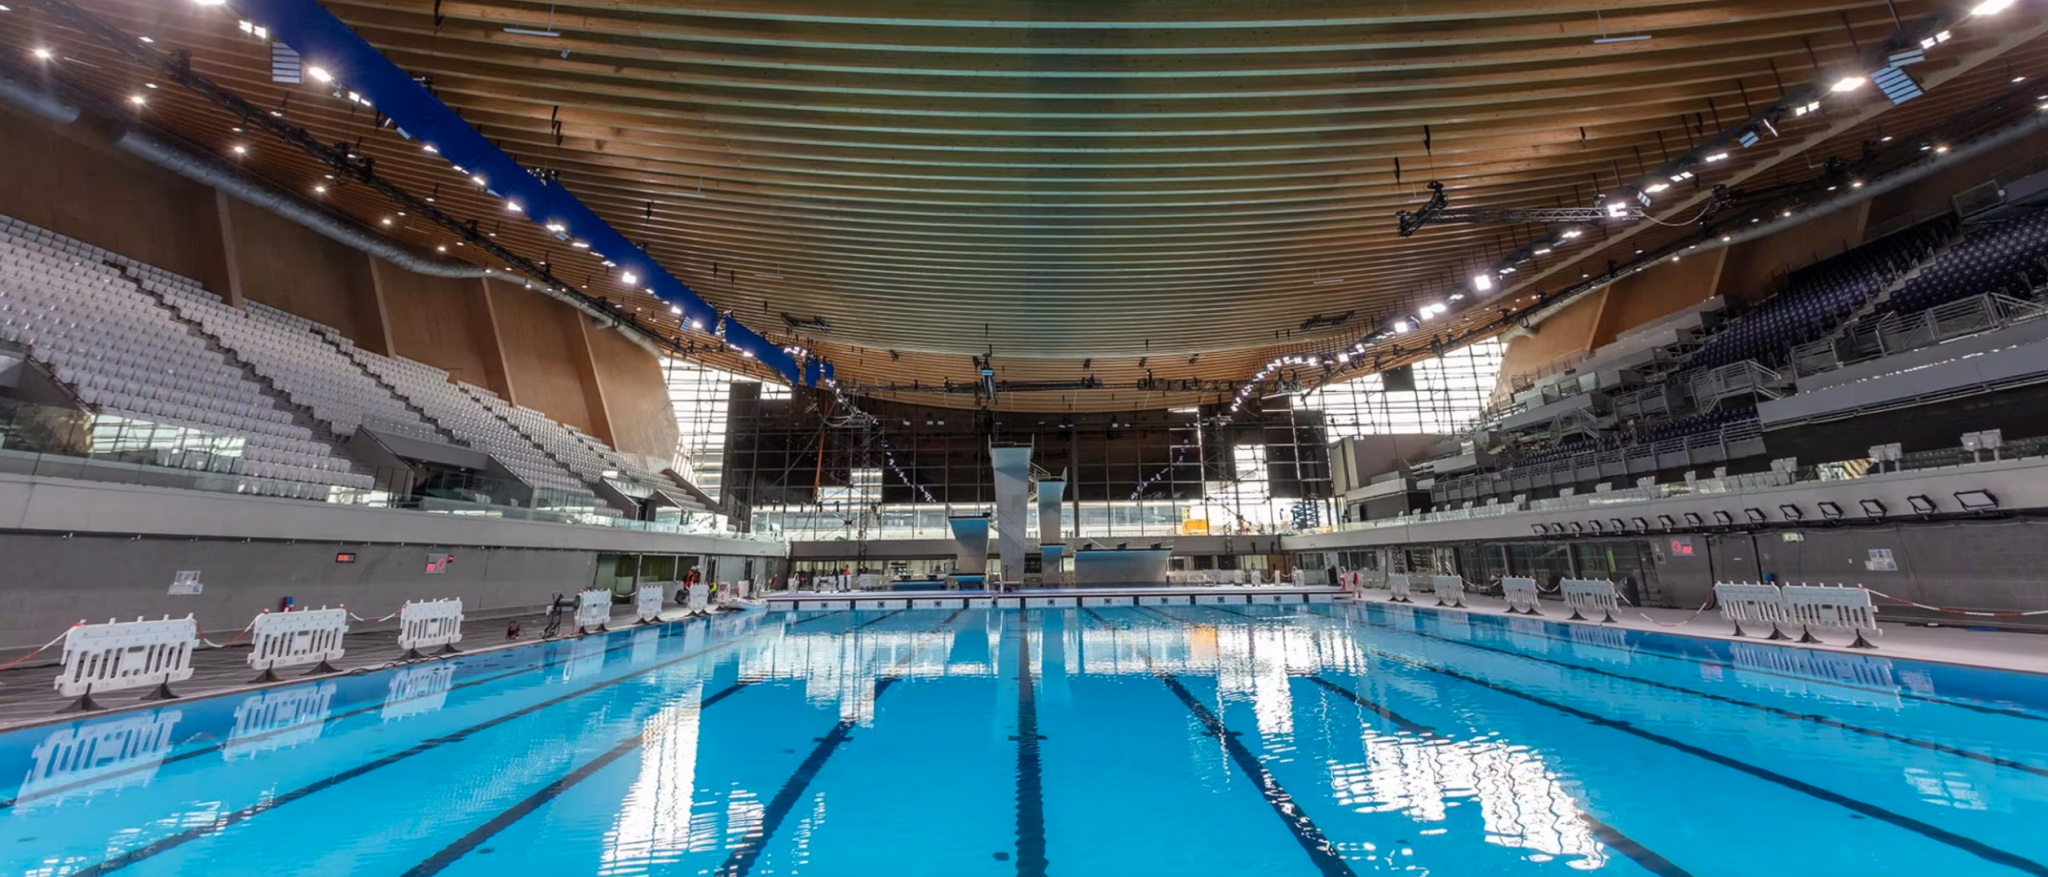 The Aquatics Centre is another arena which has been redeveloped. WORLDMARK